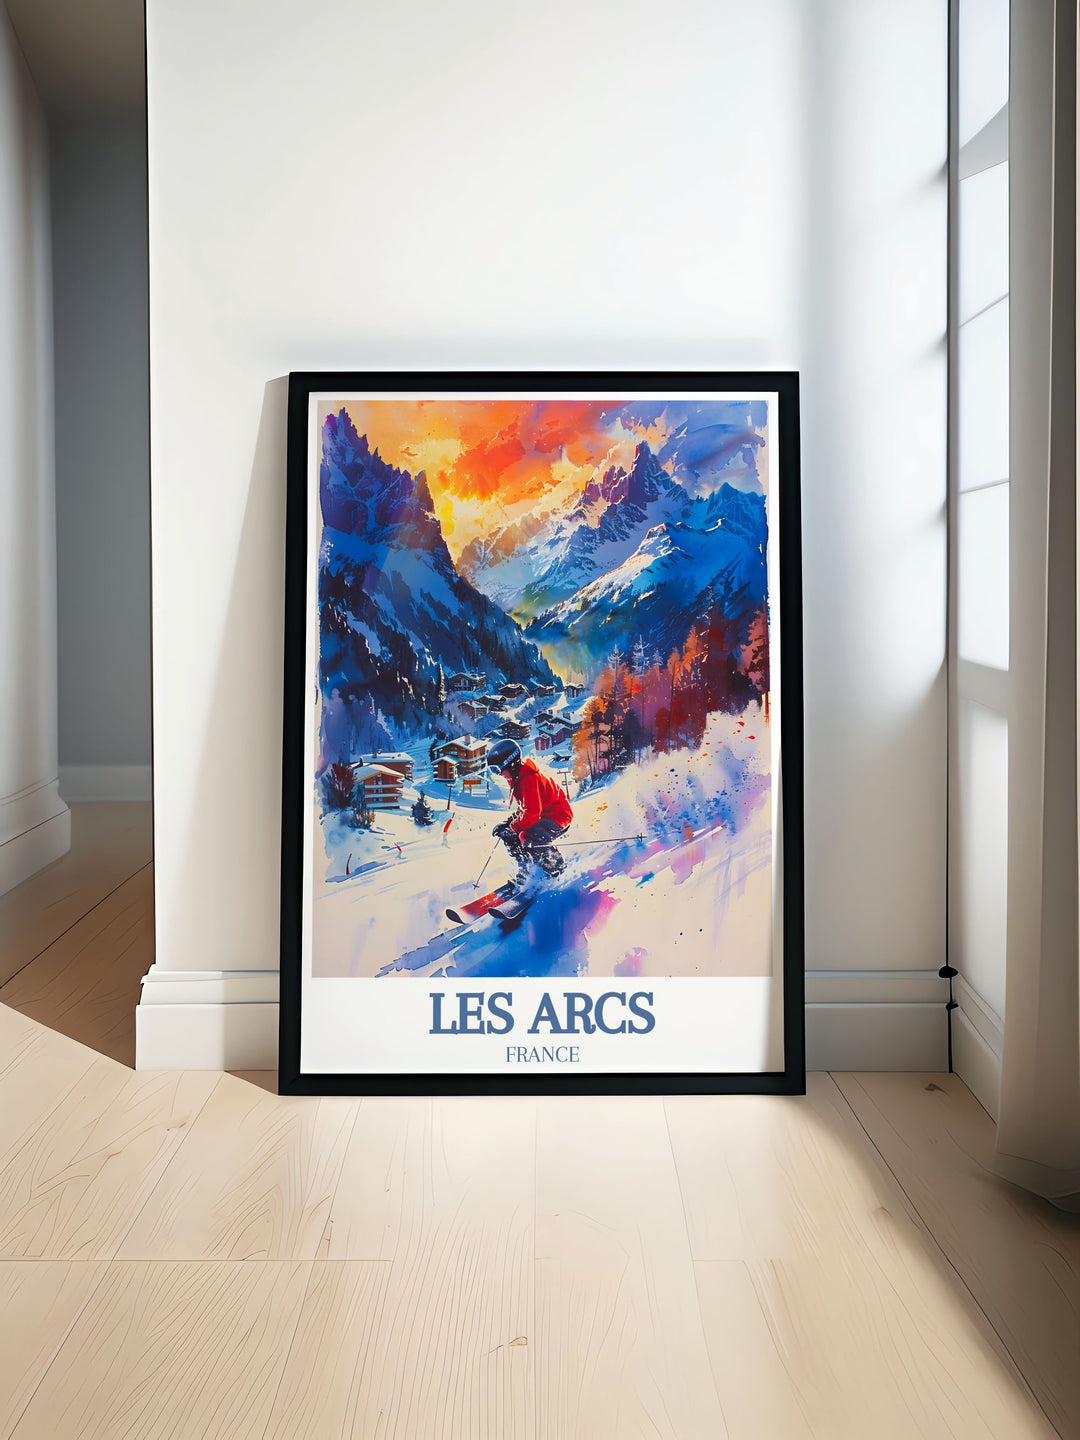 Snowboarding Poster capturing the excitement of Les Arcs in Paradiski ski area Mont Blanc with vibrant artwork showcasing the thrill of snowboarding perfect for enhancing snowboard decor and winter sports enthusiasts collections